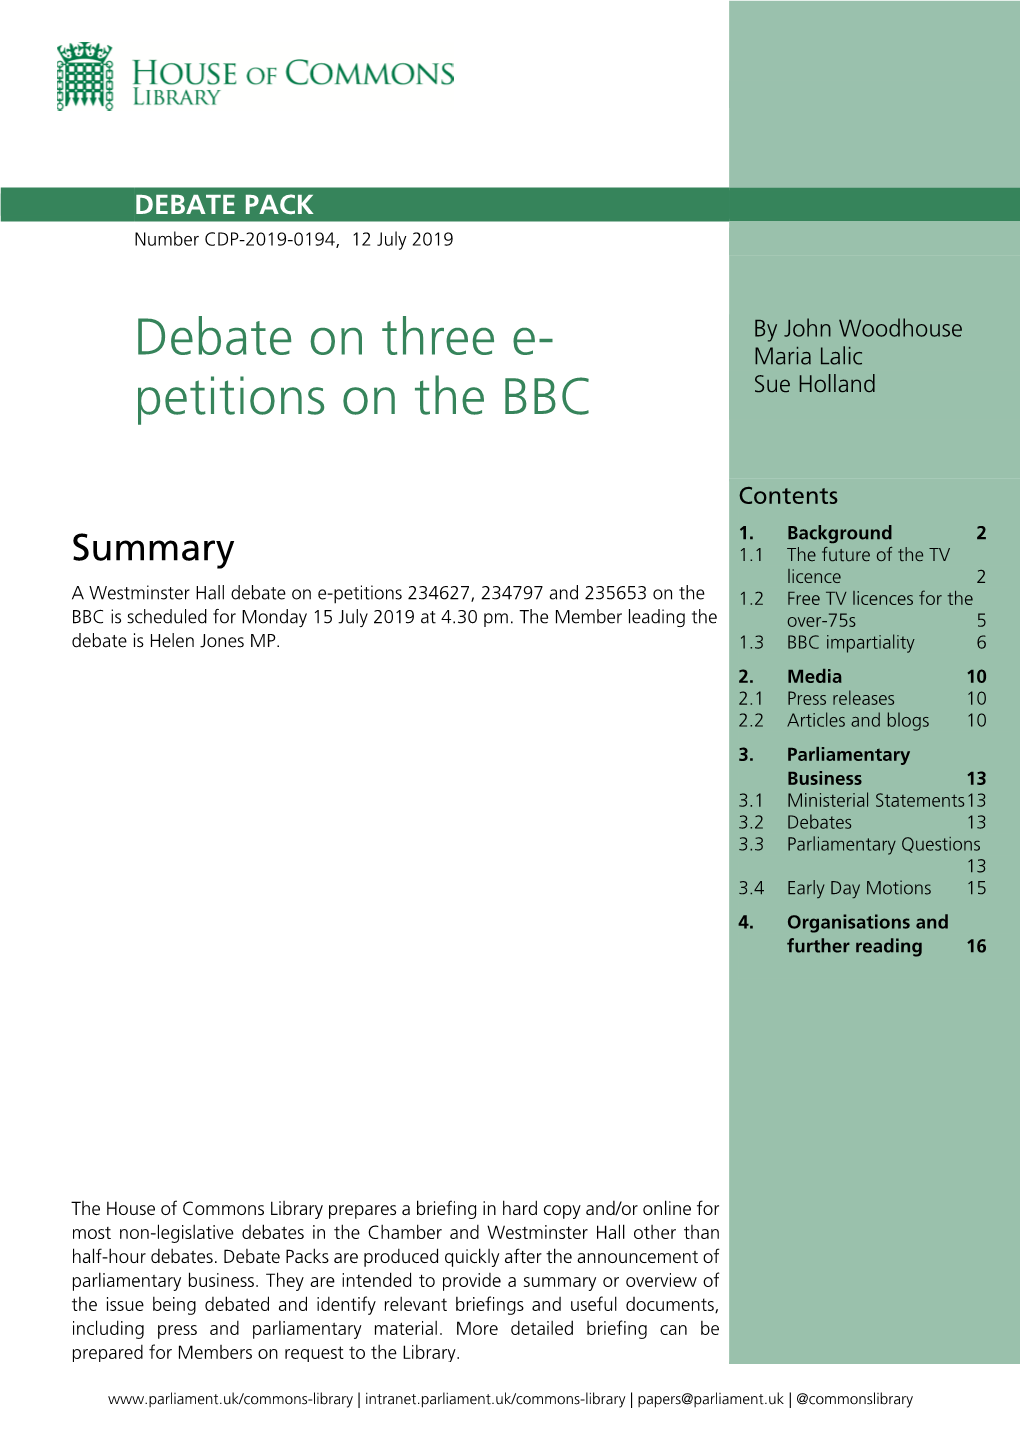 Debate on Three E-Petitions on the BBC 3